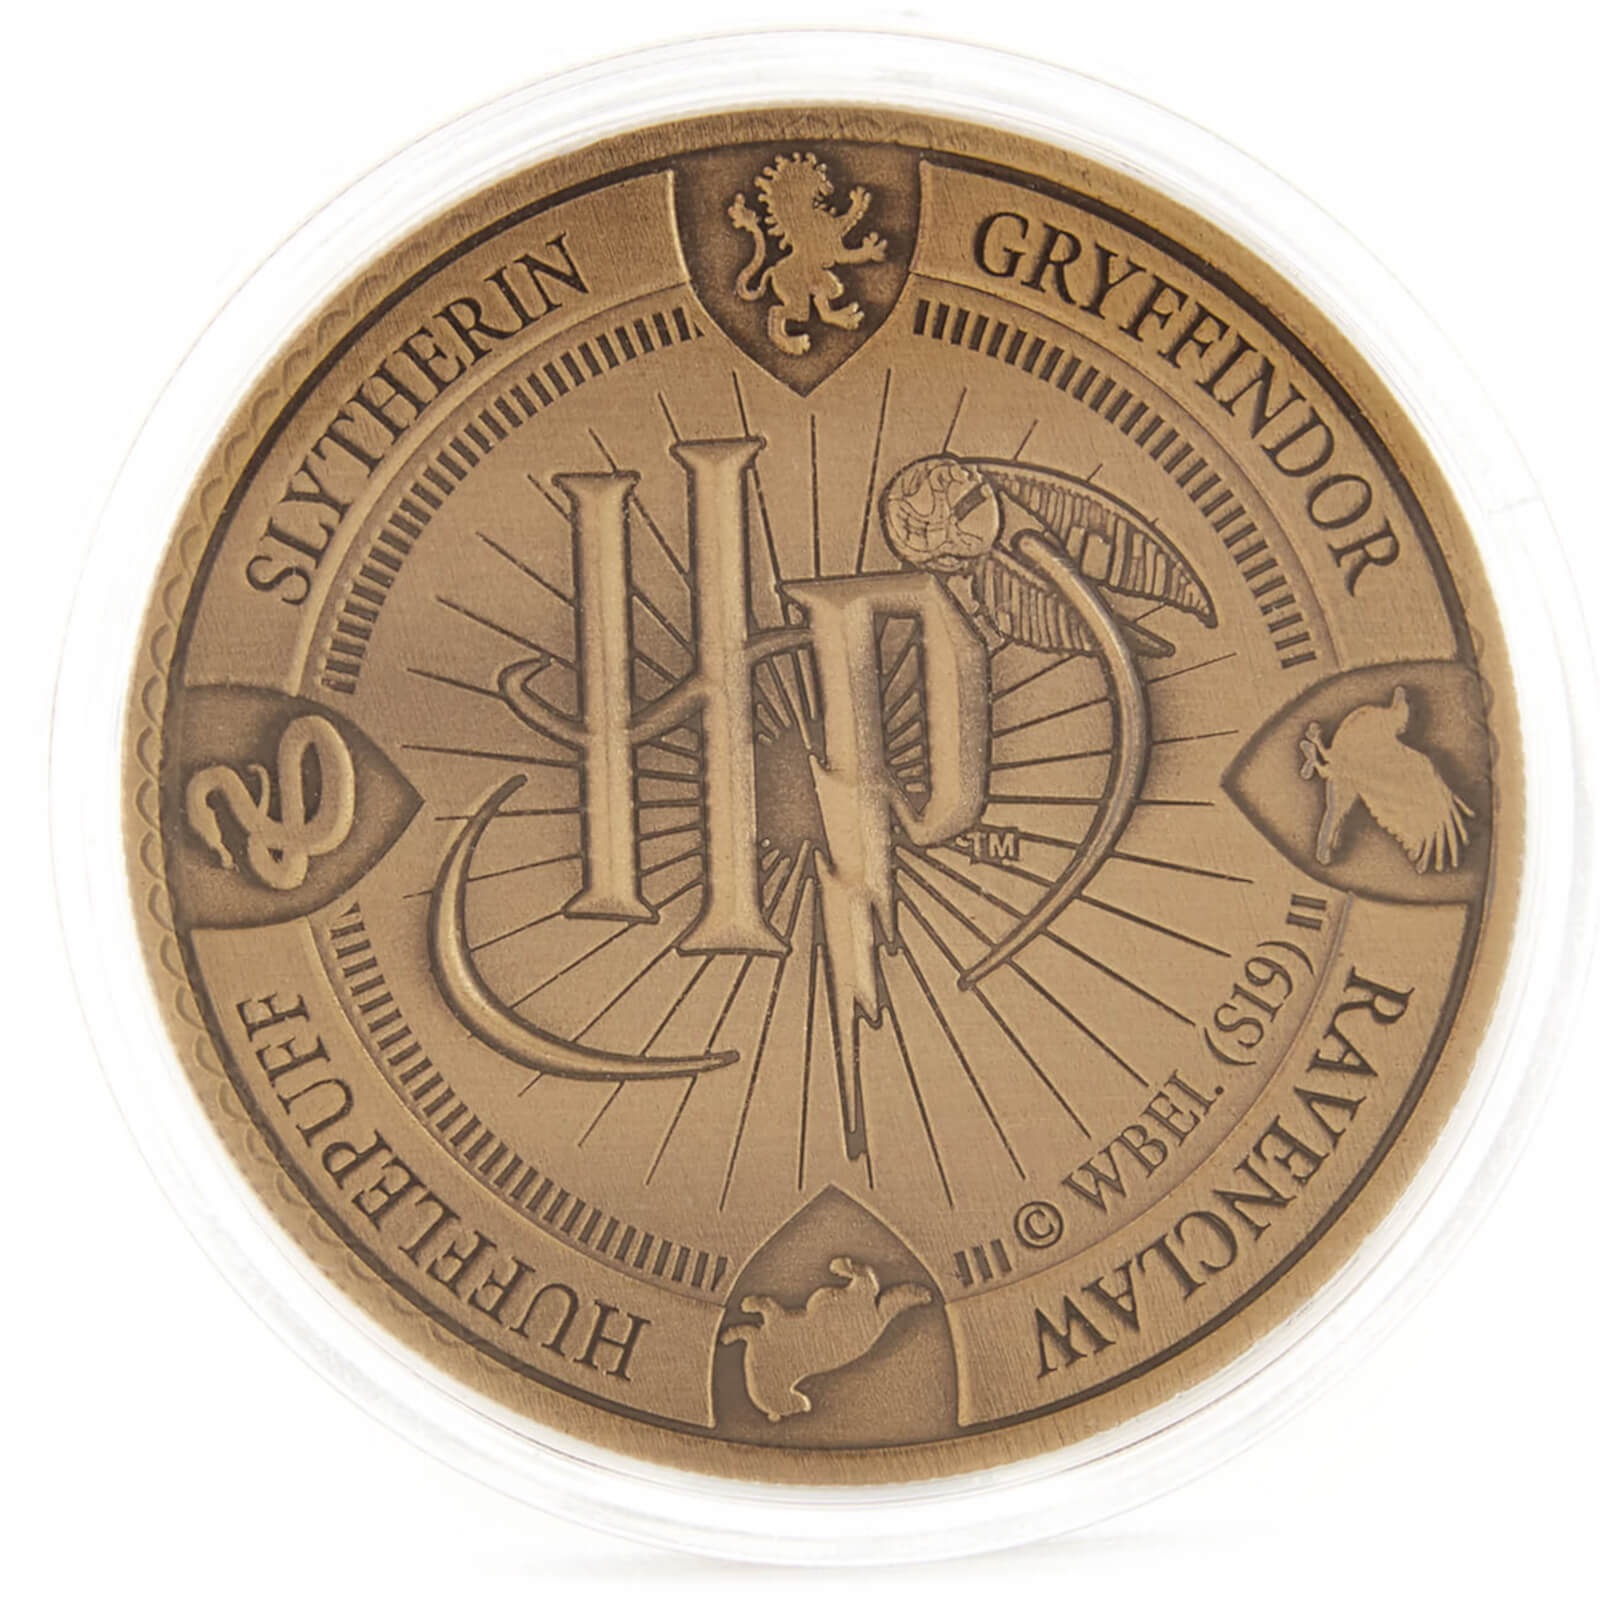 One side of a coin included in the “Harry Potter” coin Advent calendar displays an “HP” logo with a Golden Snitch and the names and crests of the four Hogwarts Houses around the edge.